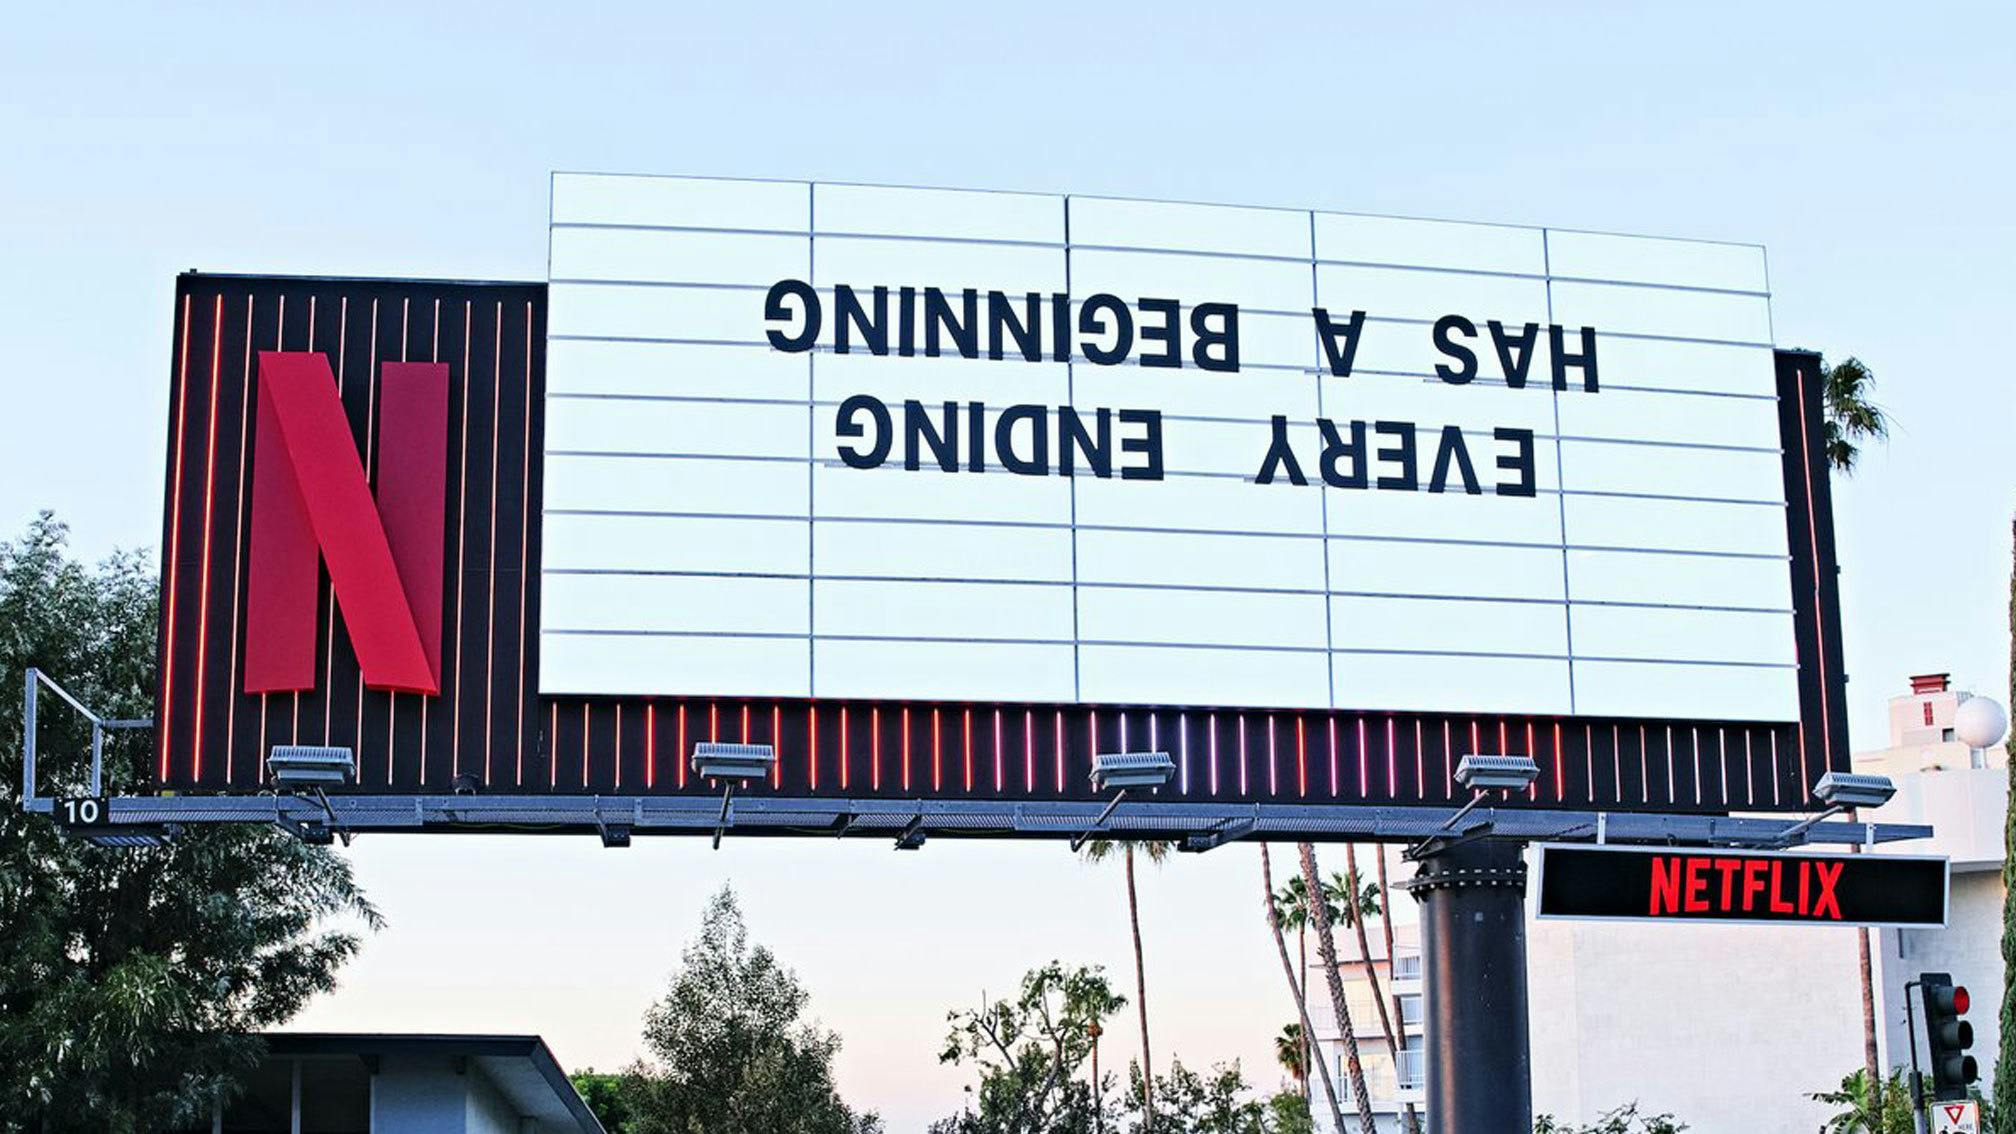 Netflix teases Stranger Things 4 with upside-down billboard